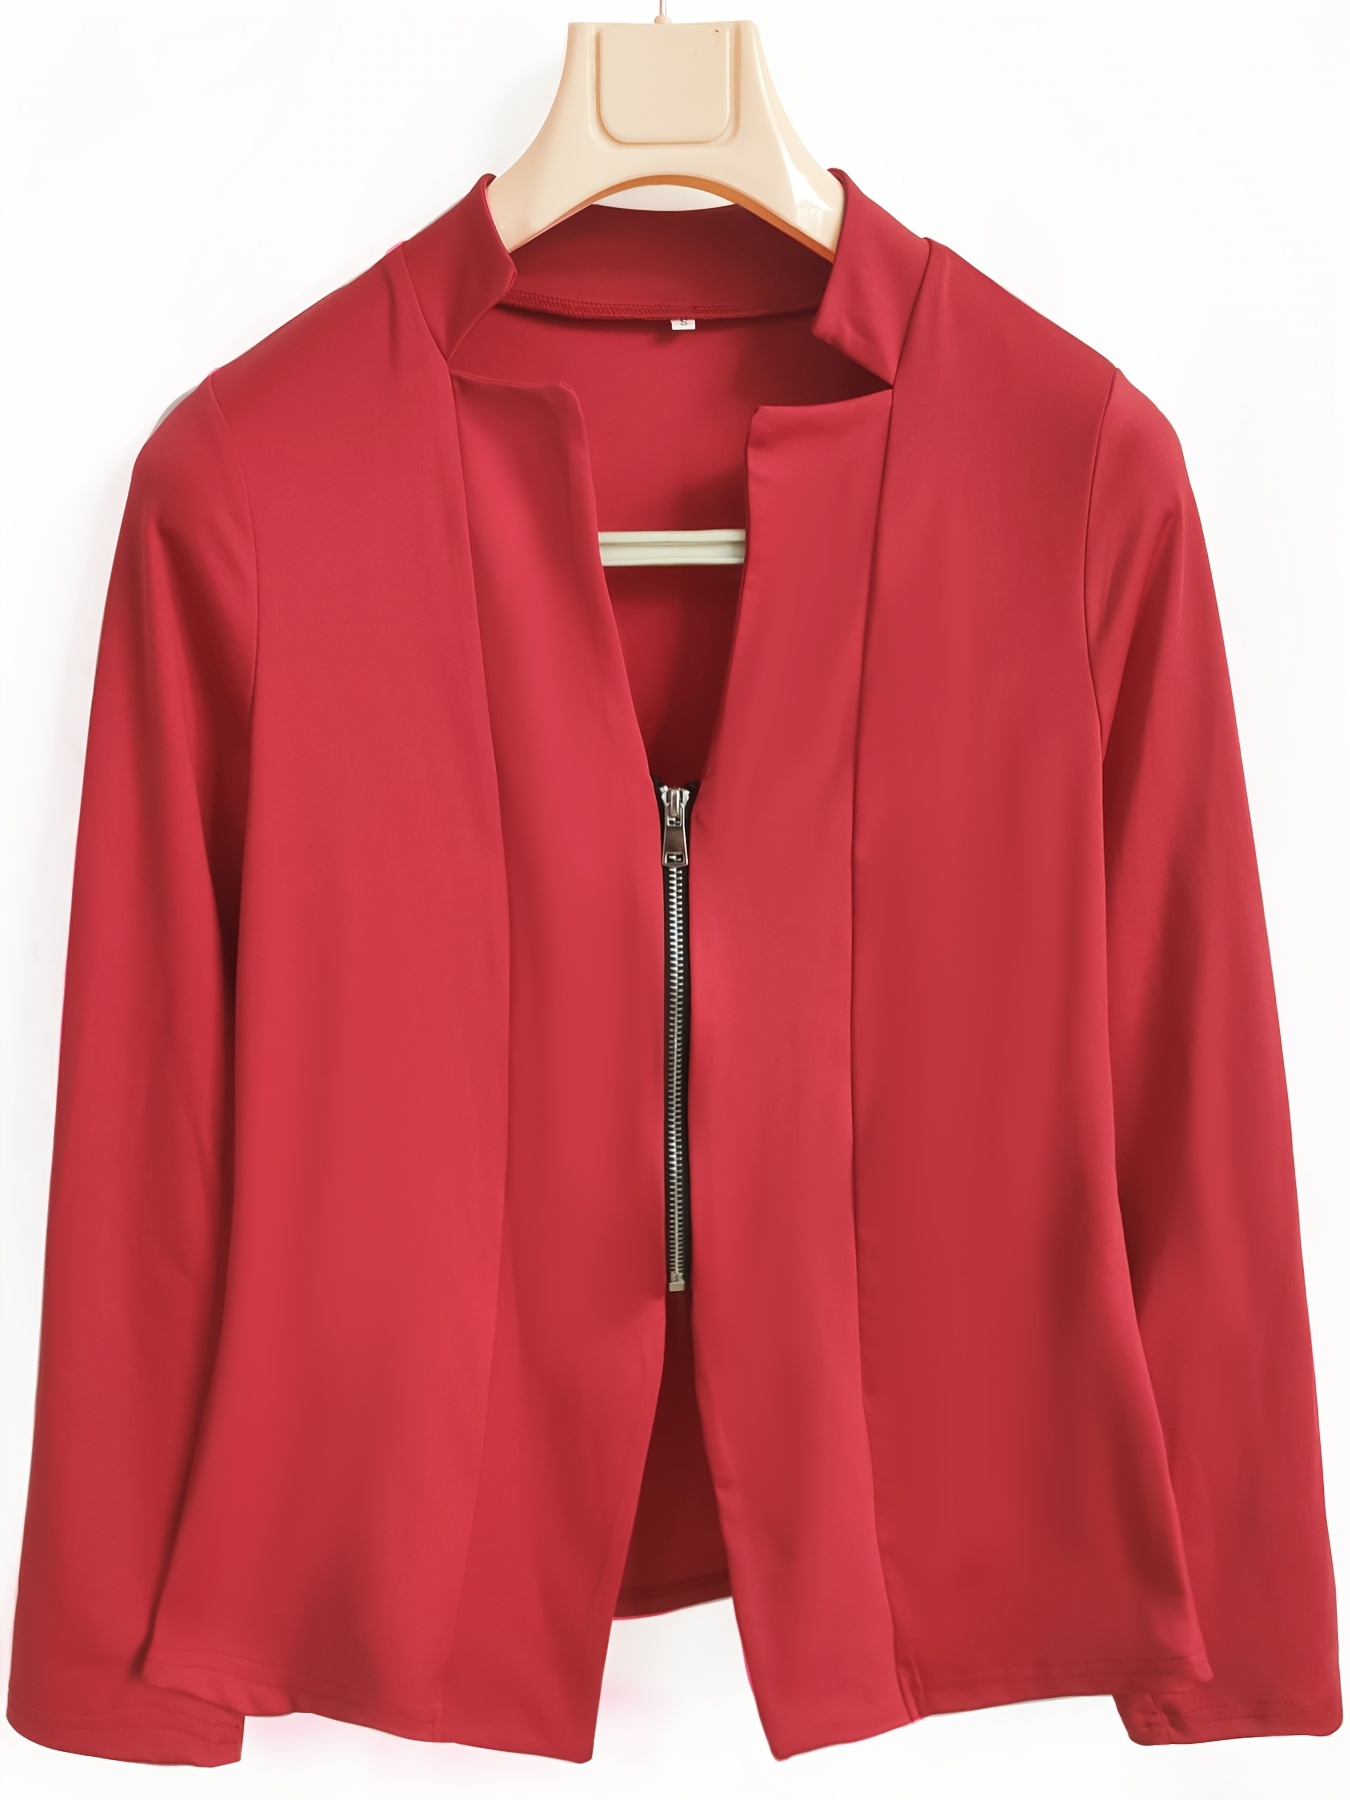 Gradient Color Office Suit For Women Jacket With Lapel V Neck, Long  Sleeves, Corset, And Zipper Closure Perfect For Office And Formal Occasions  From Jinjingba, $21.85